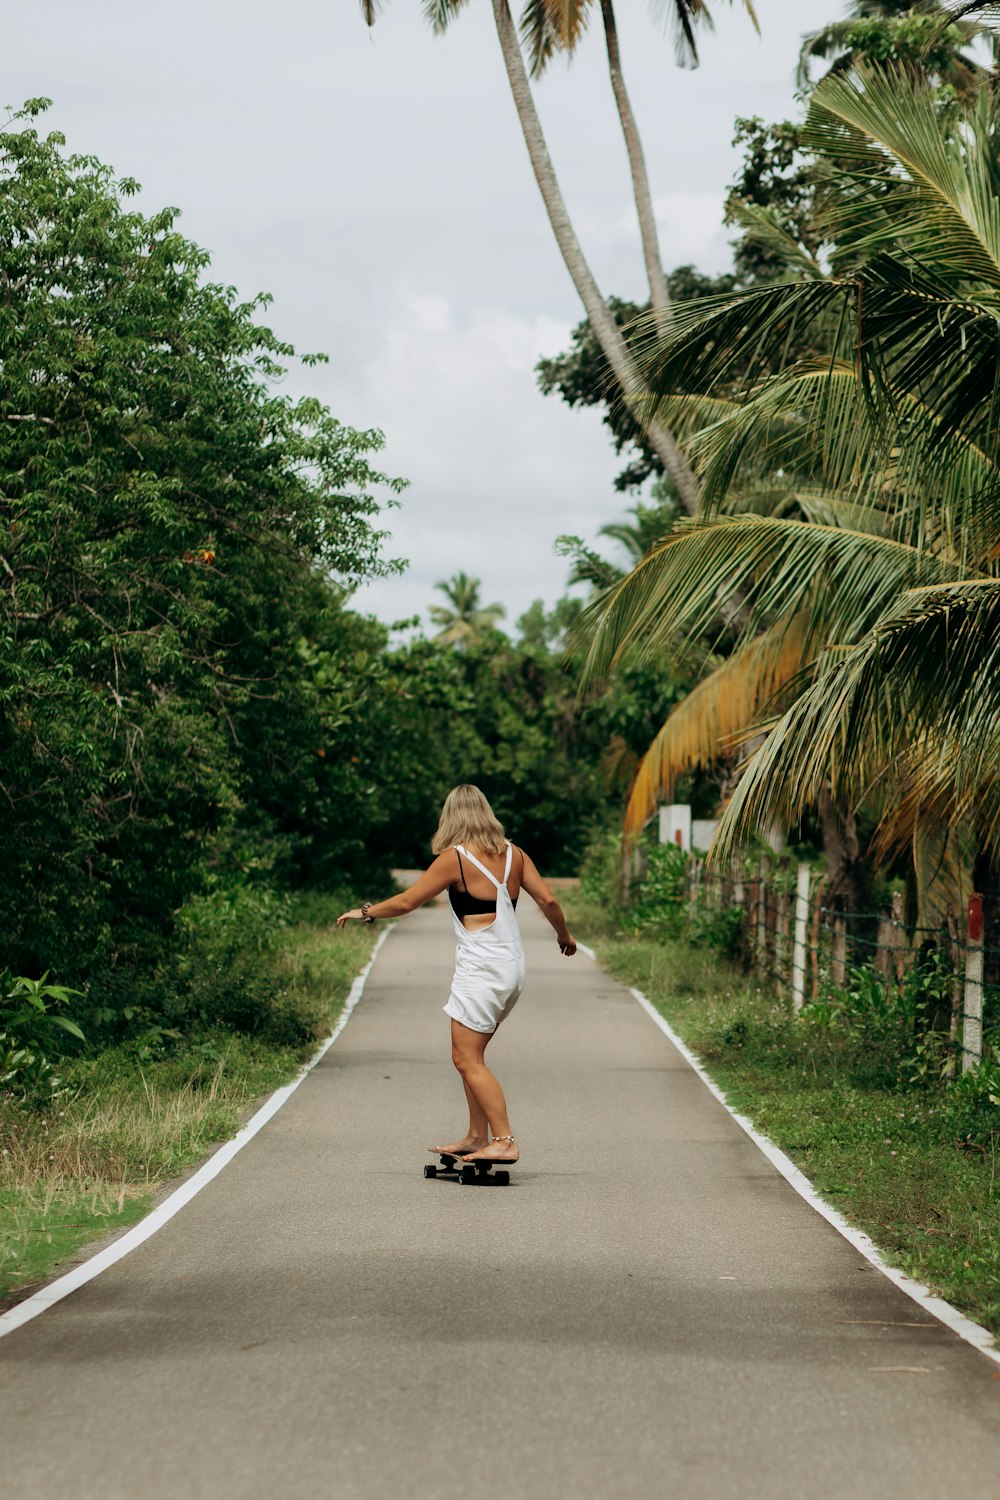 a woman riding a skateboard down a road next to palm trees